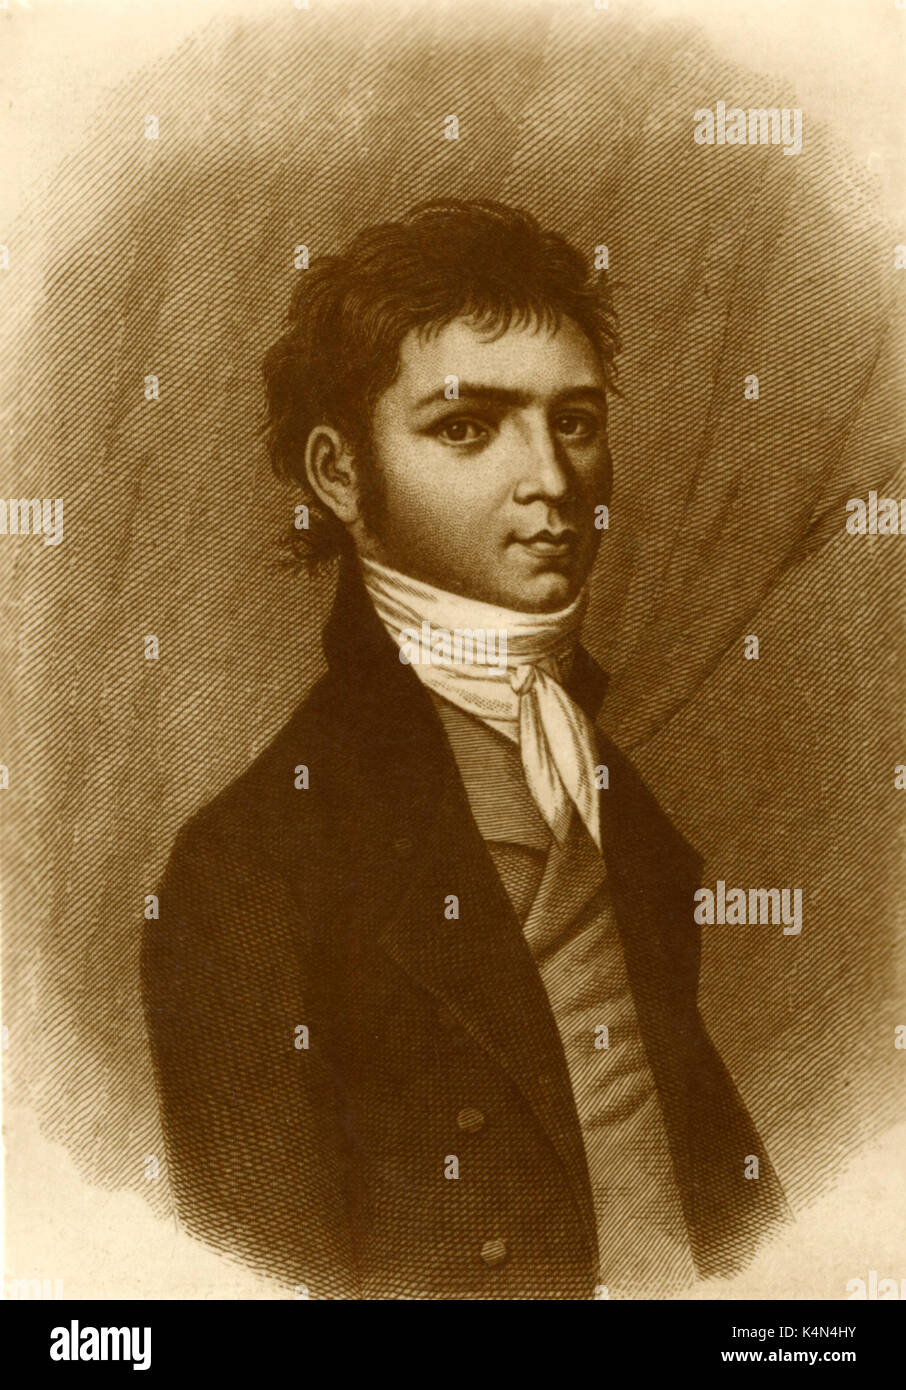 BEETHOVEN, Ludwig van - as a young man German composer 1770-1827 Stock  Photo - Alamy